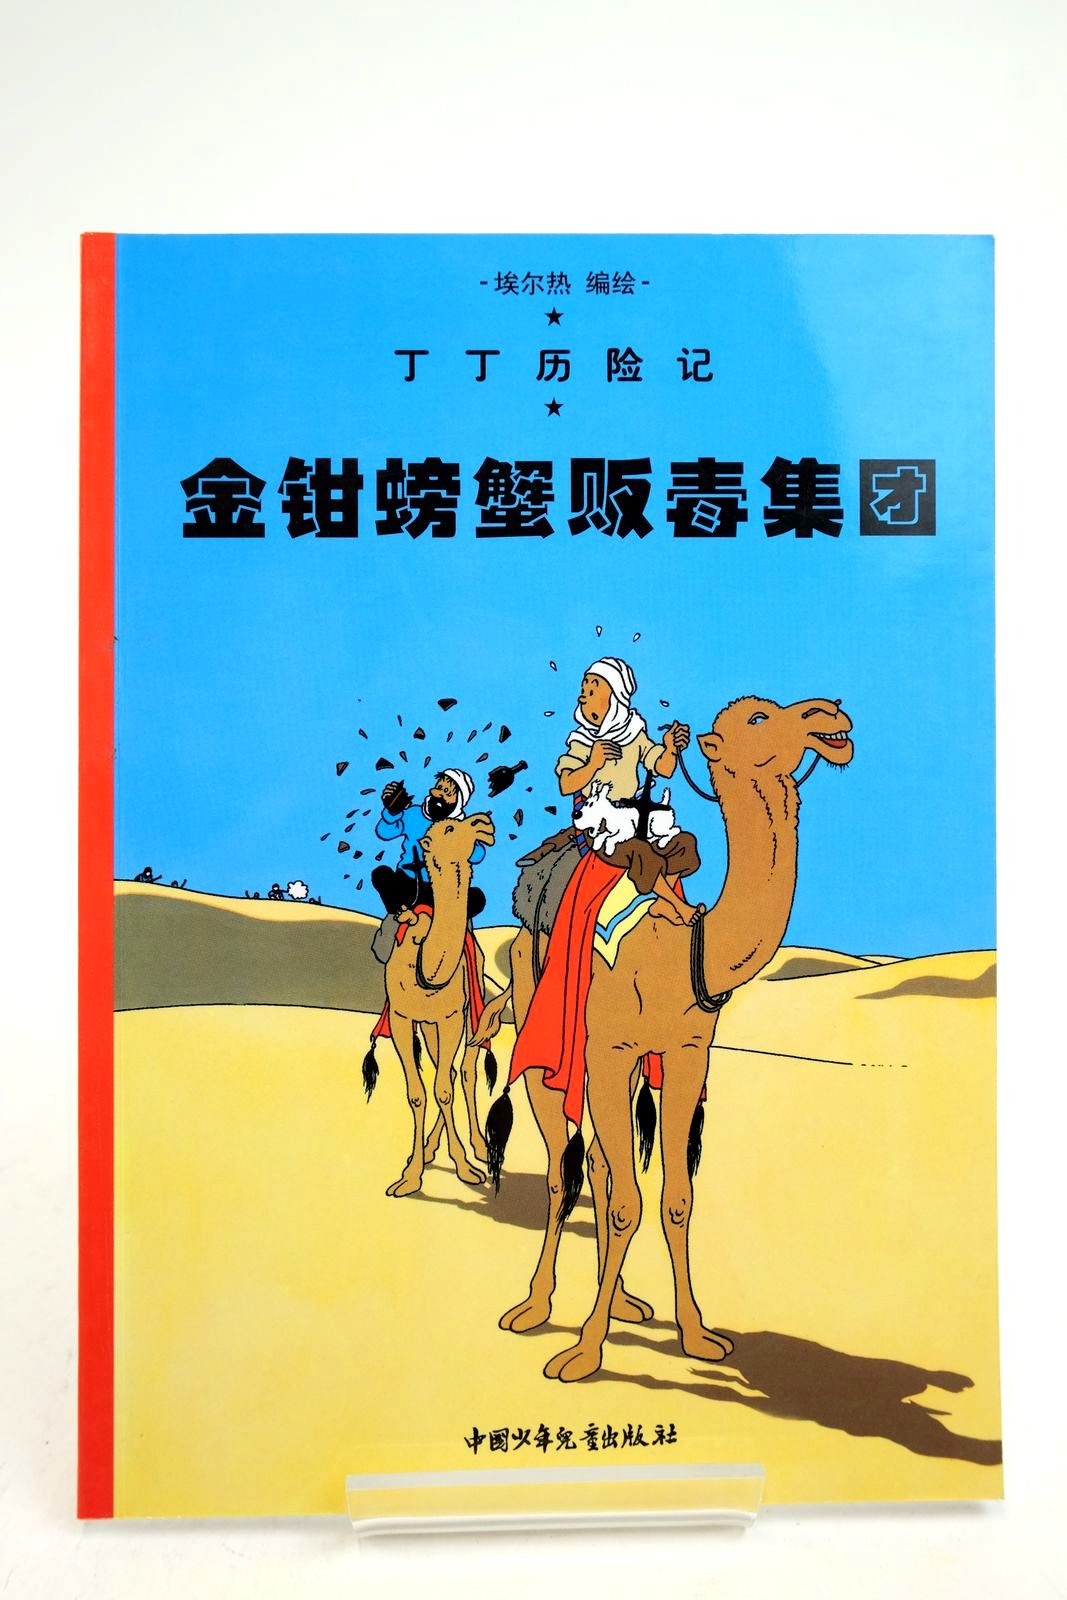 Photo of THE ADVENTURES OF TINTIN: THE CRAB WITH THE GOLDEN CLAWS (CHINESE LANGUAGE EDITION) written by Herge, illustrated by Herge, published by China Press (STOCK CODE: 2140350)  for sale by Stella & Rose's Books